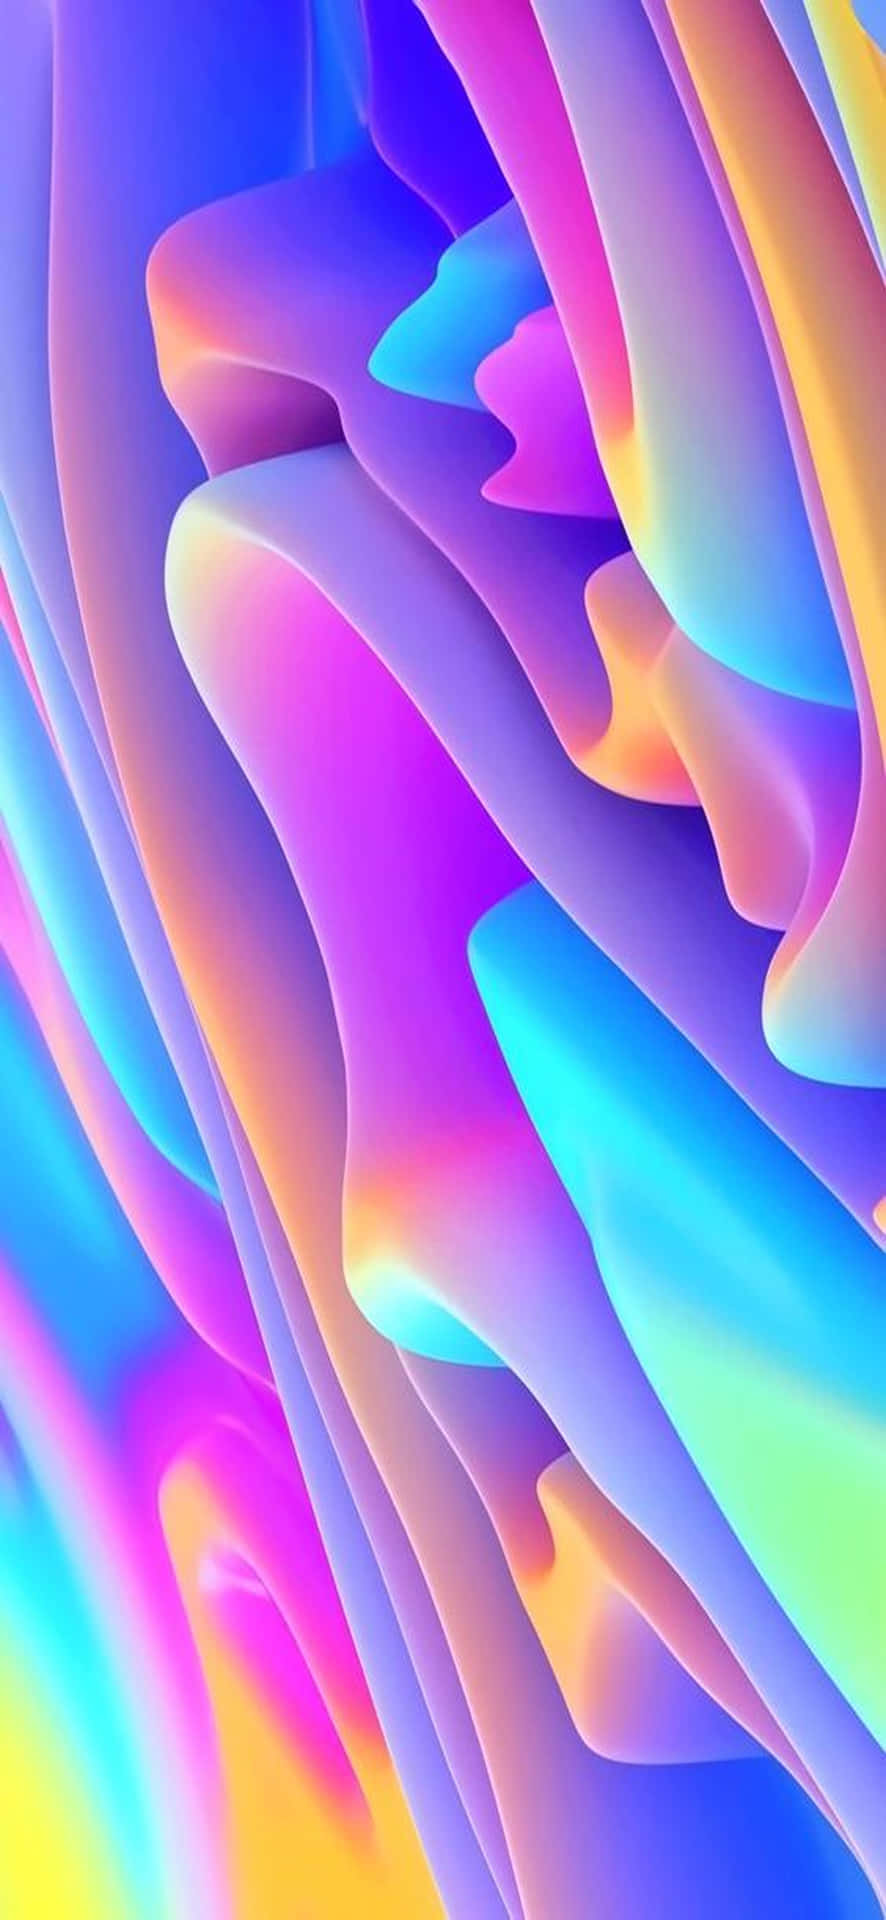 A Colorful Abstract Background With A Rainbow Colored Pattern Background